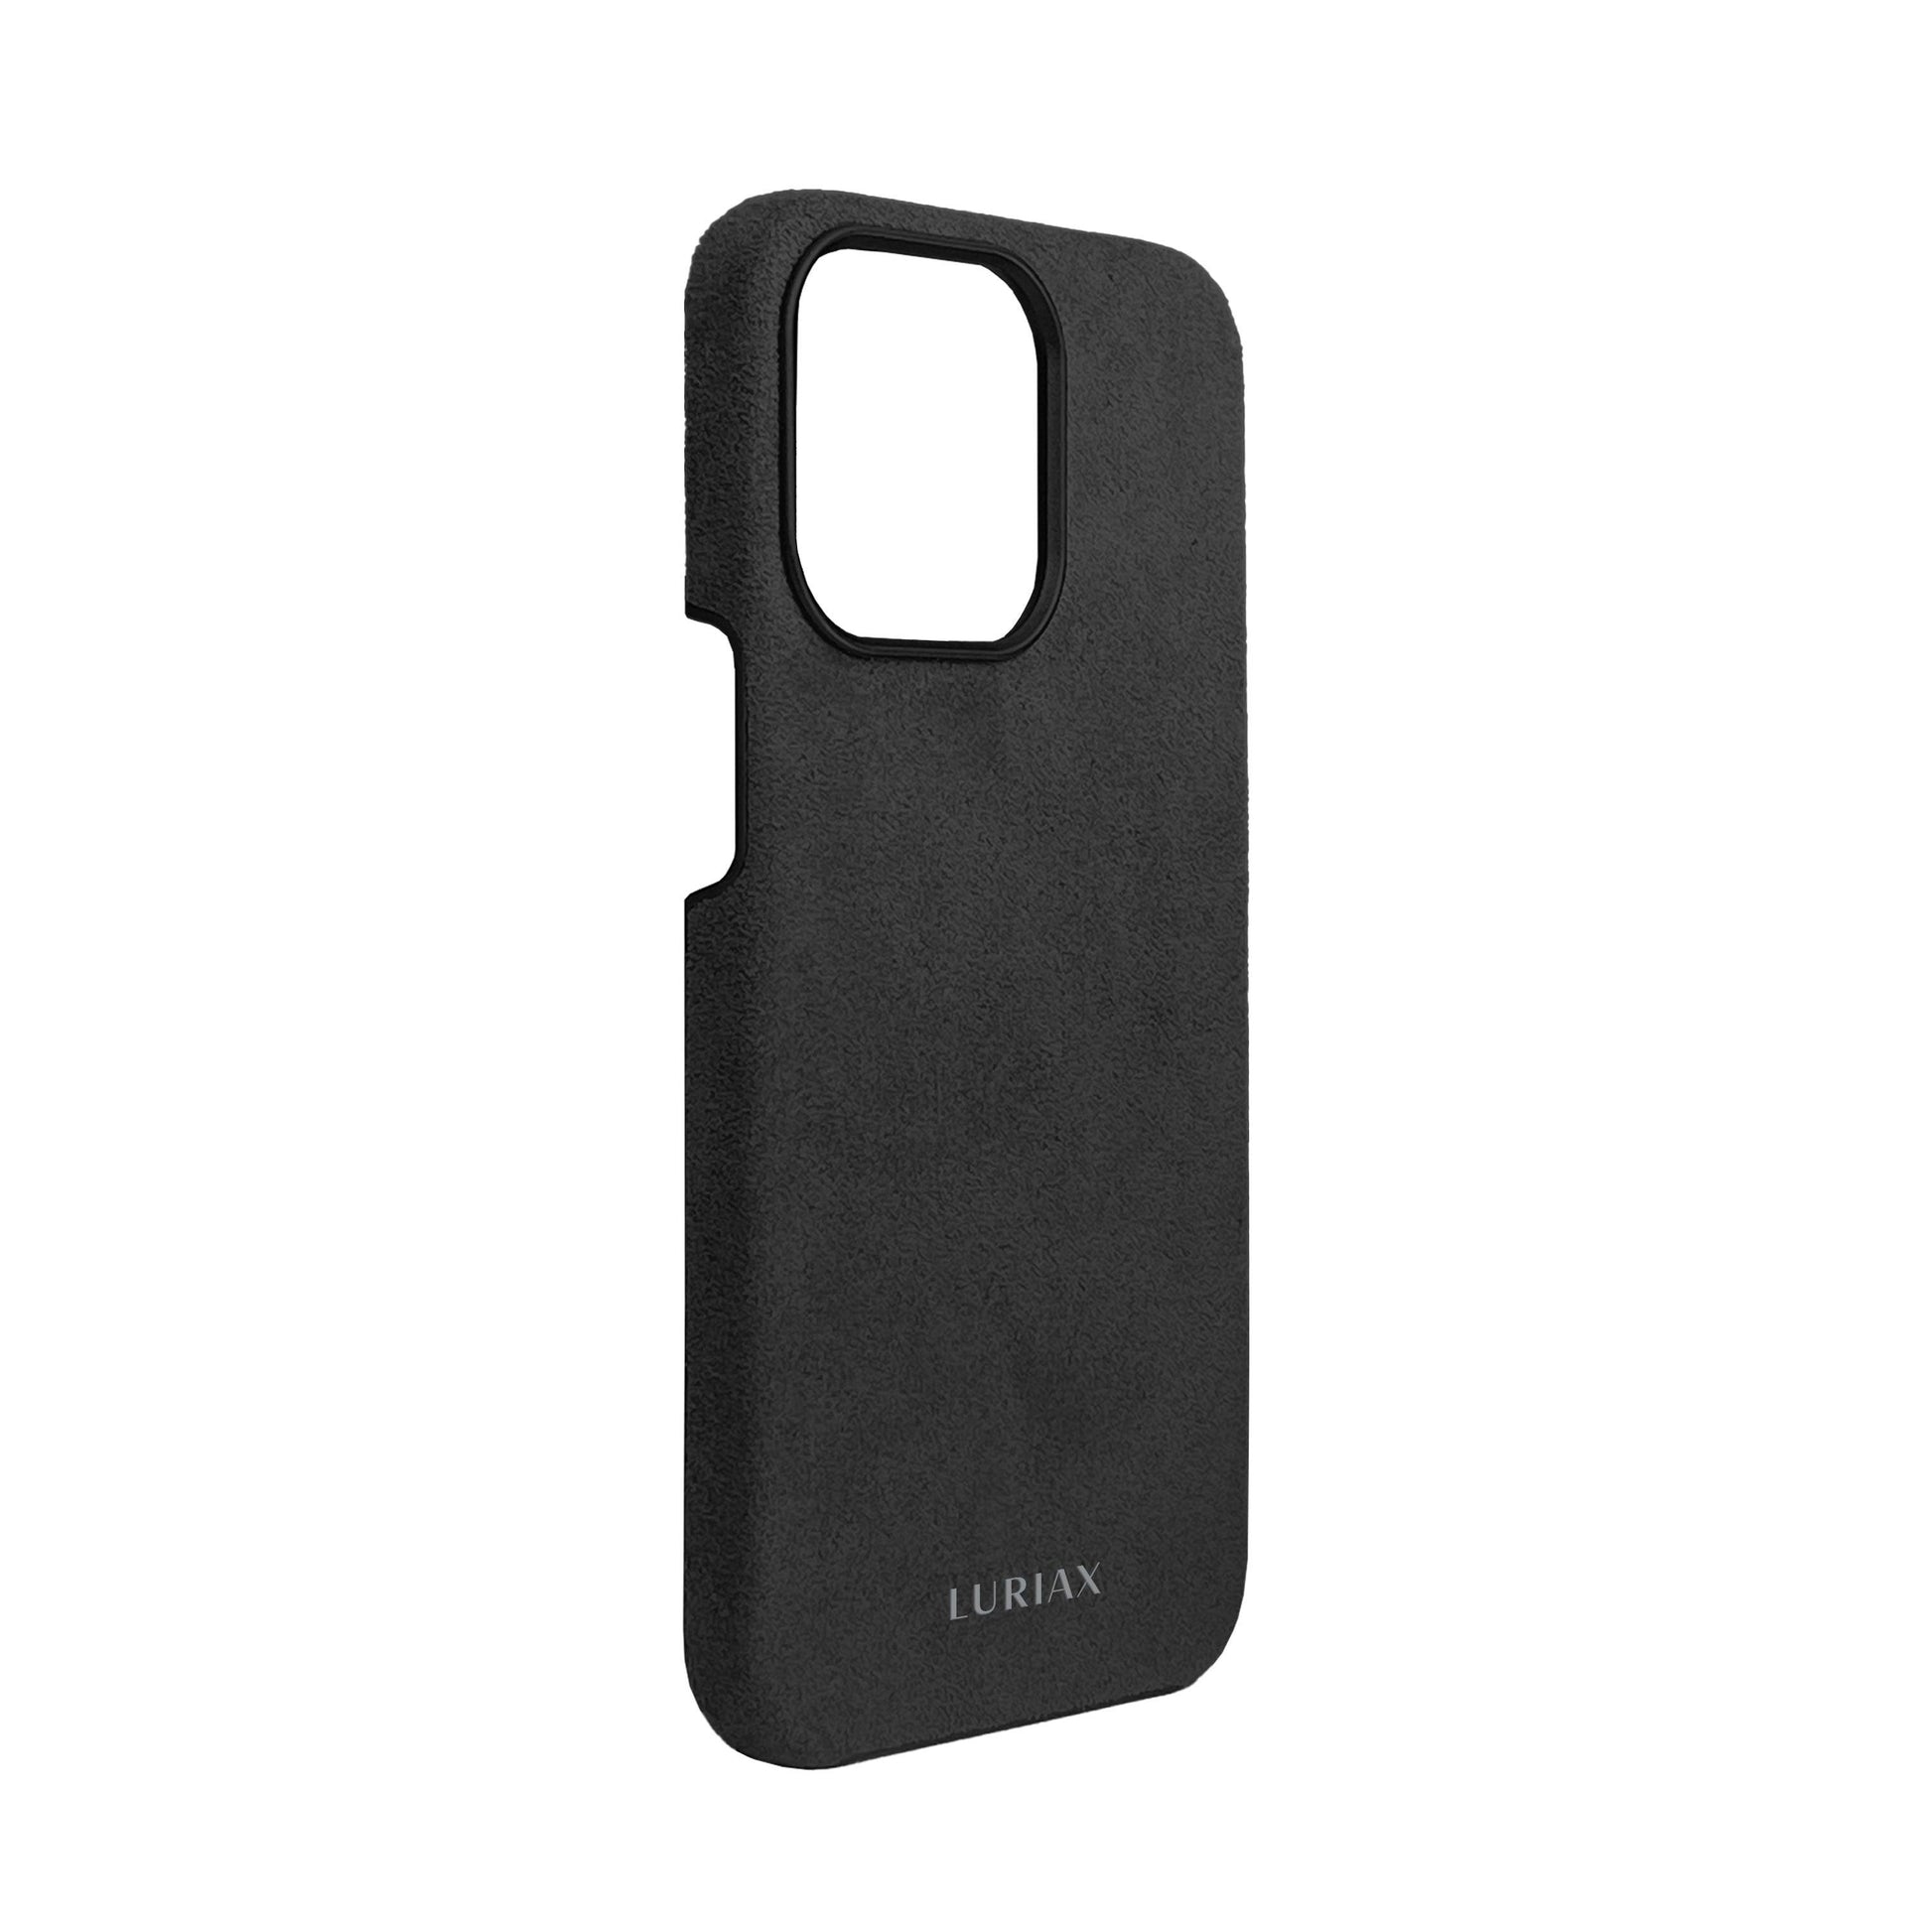 Alcantara Suede Leather iPhone Case and Accessories Collection - The Back Case - Charcoal Black - Luriax